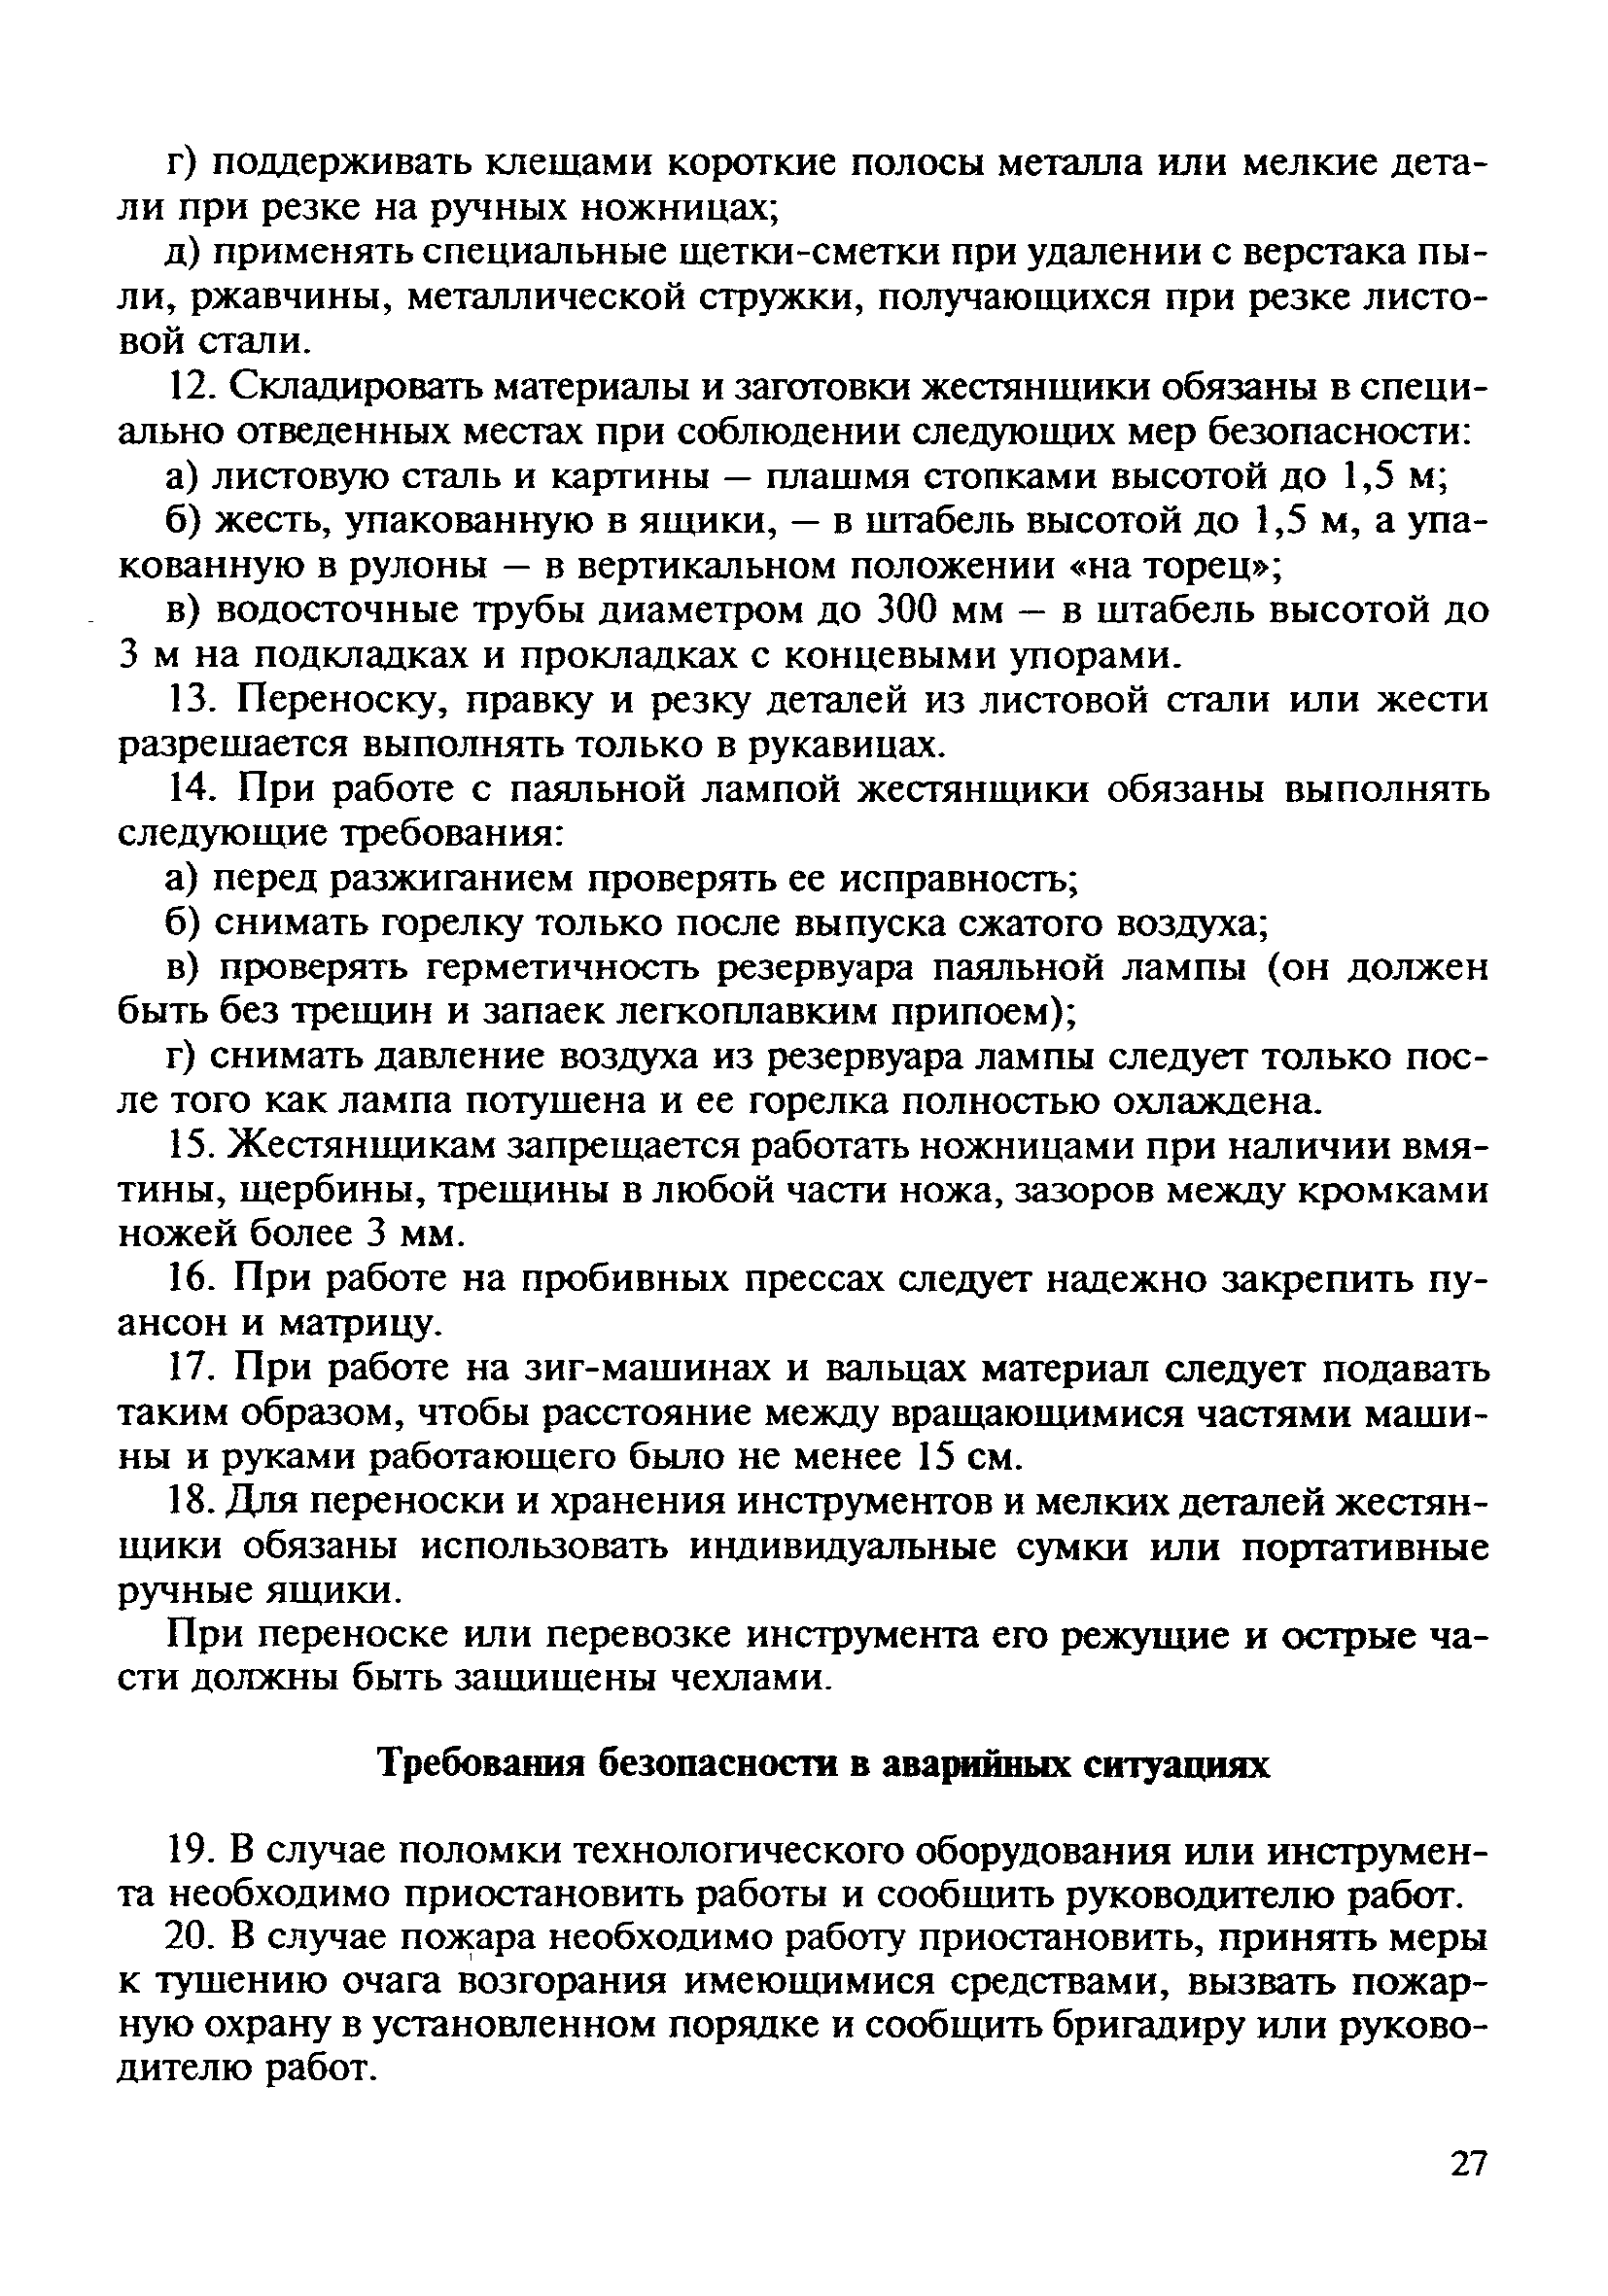 ТИ Р О-008-2003